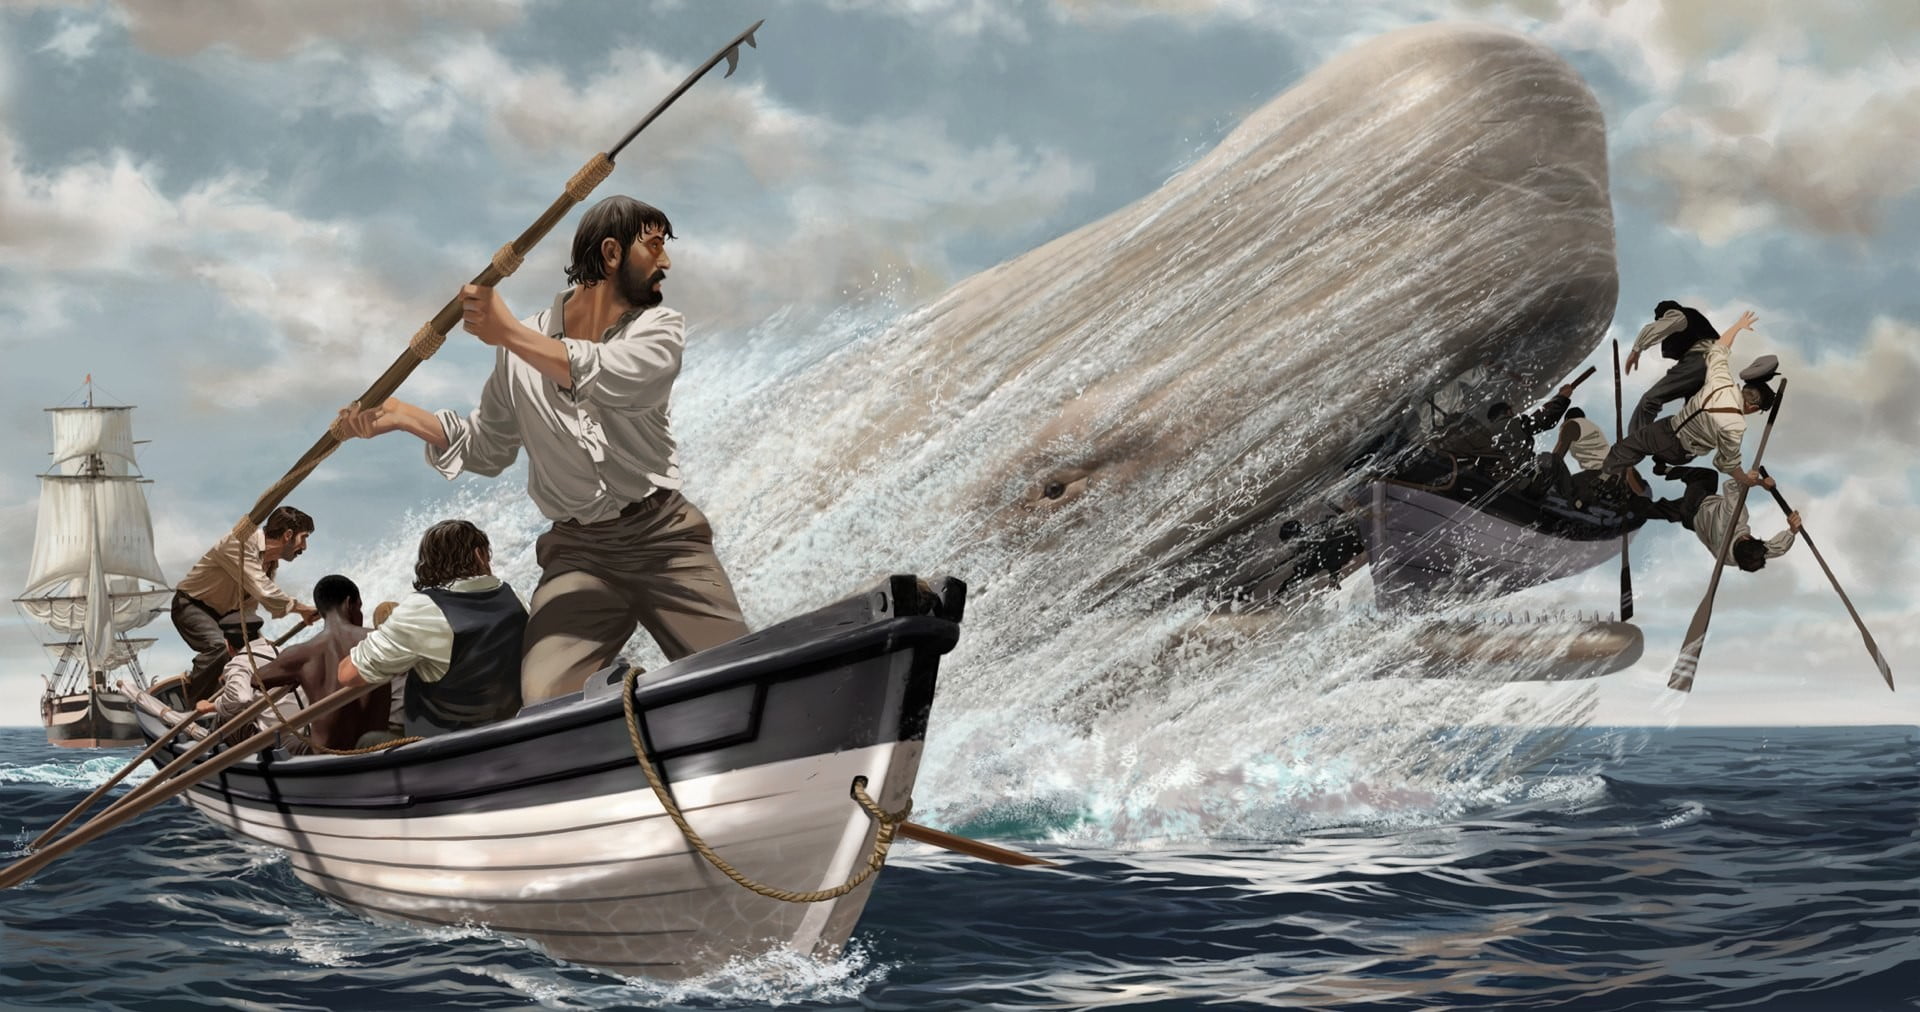 Why was captain ahab hunting moby dick